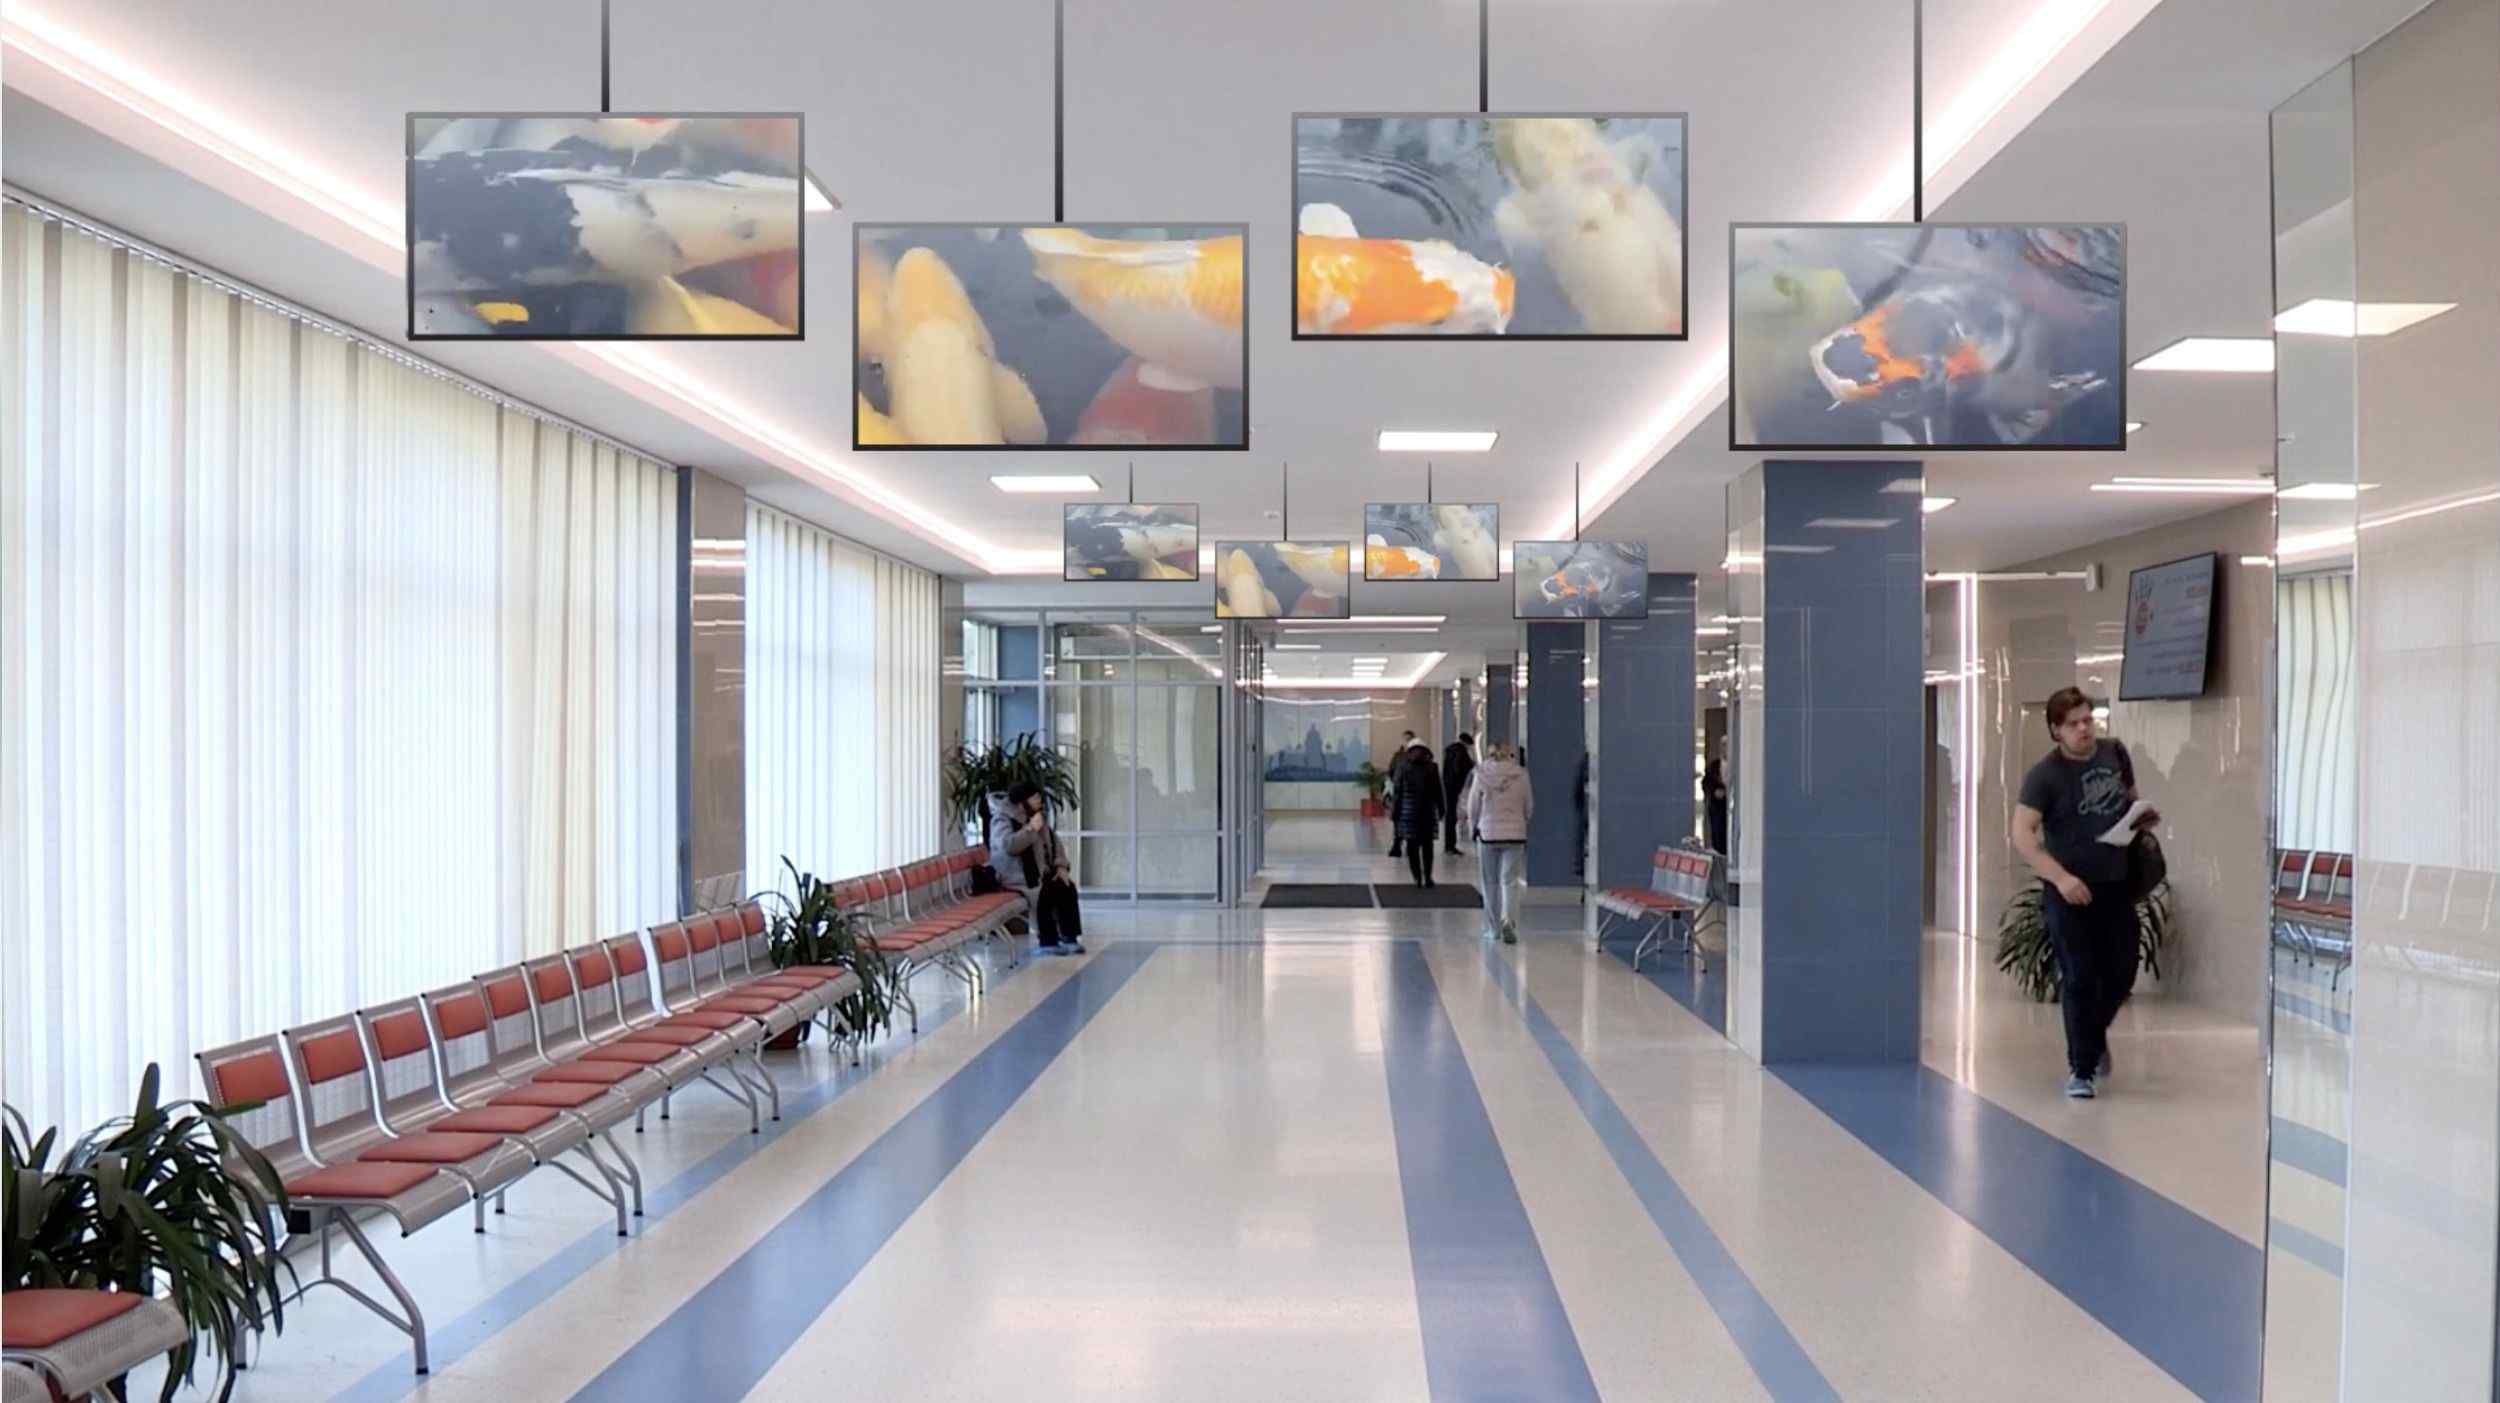 Mosaic design use for hospital that is Cost-effective modular solution